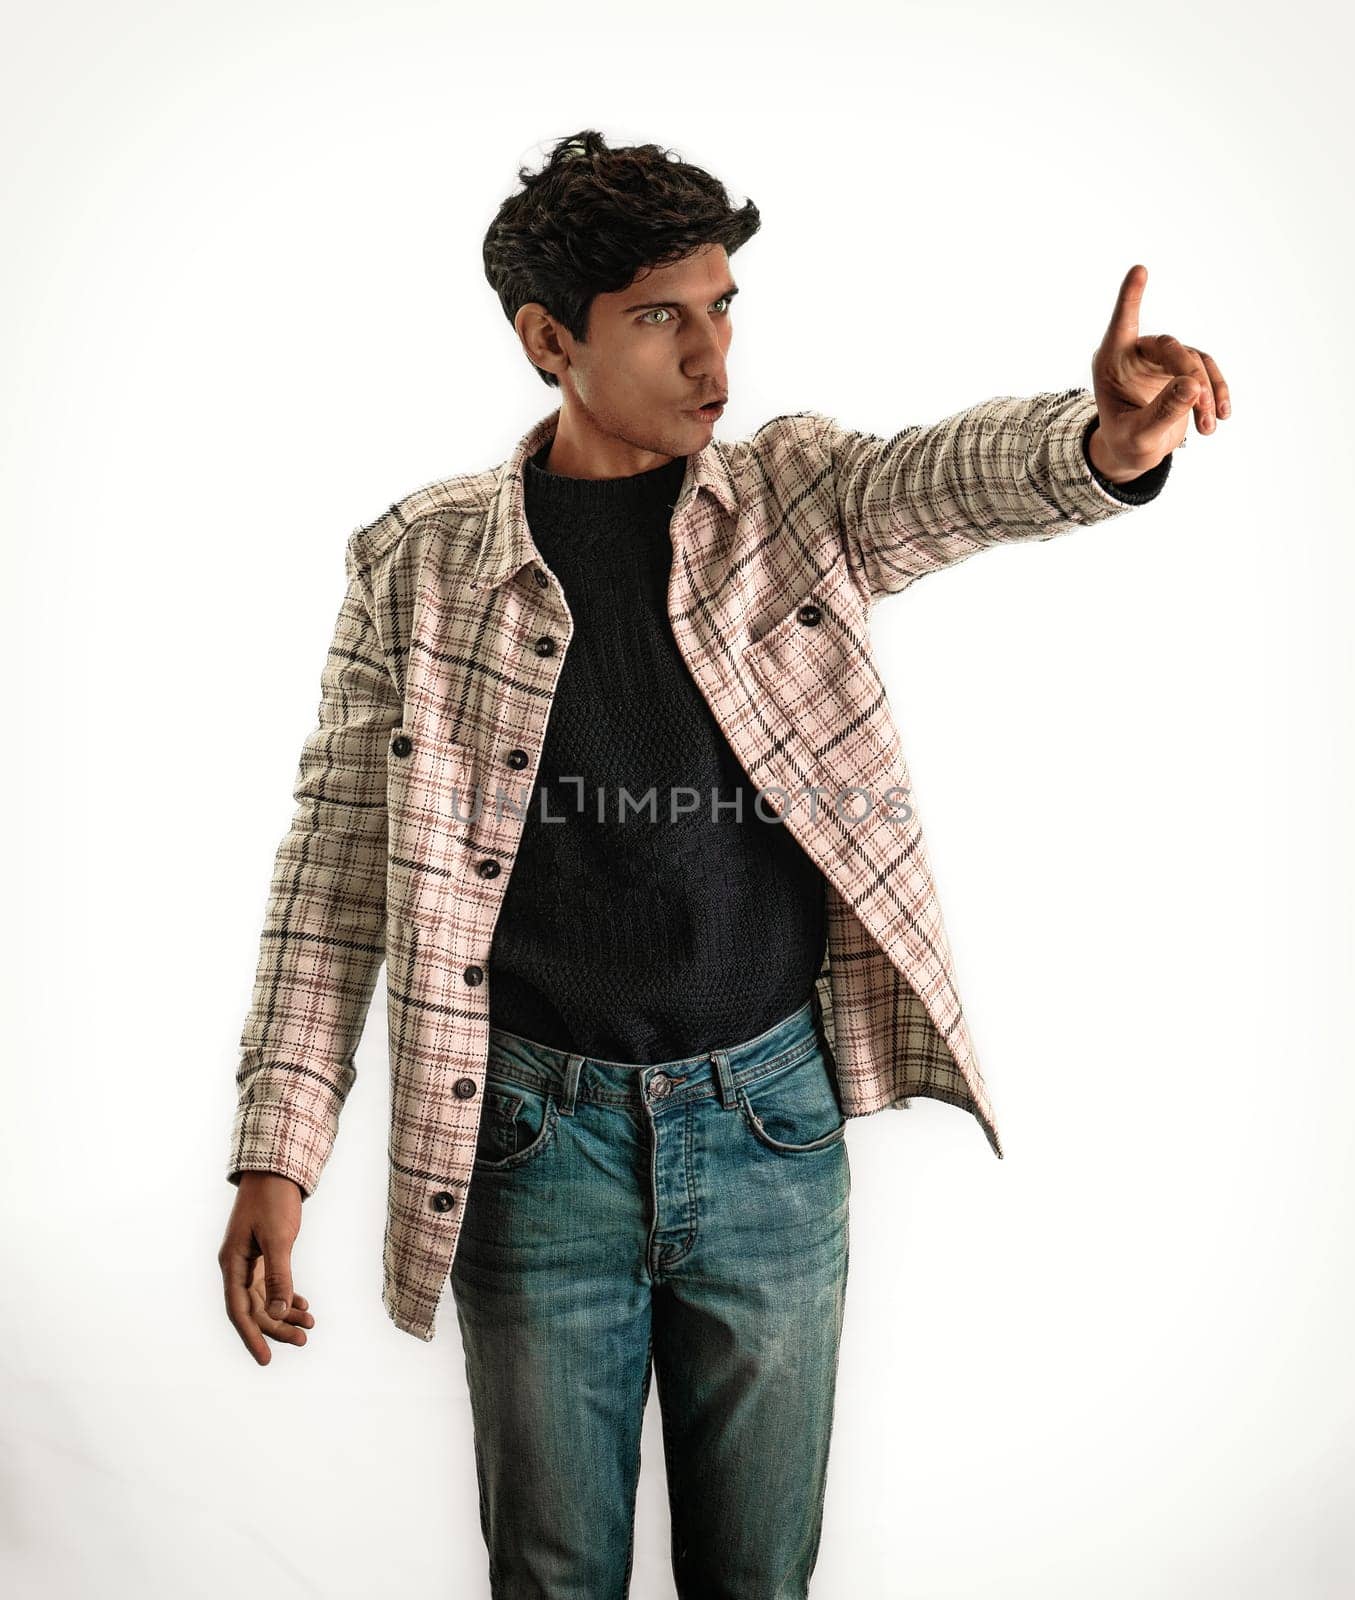 The Curious Man in a Plaid Jacket, Gesturing No with his Hand by artofphoto